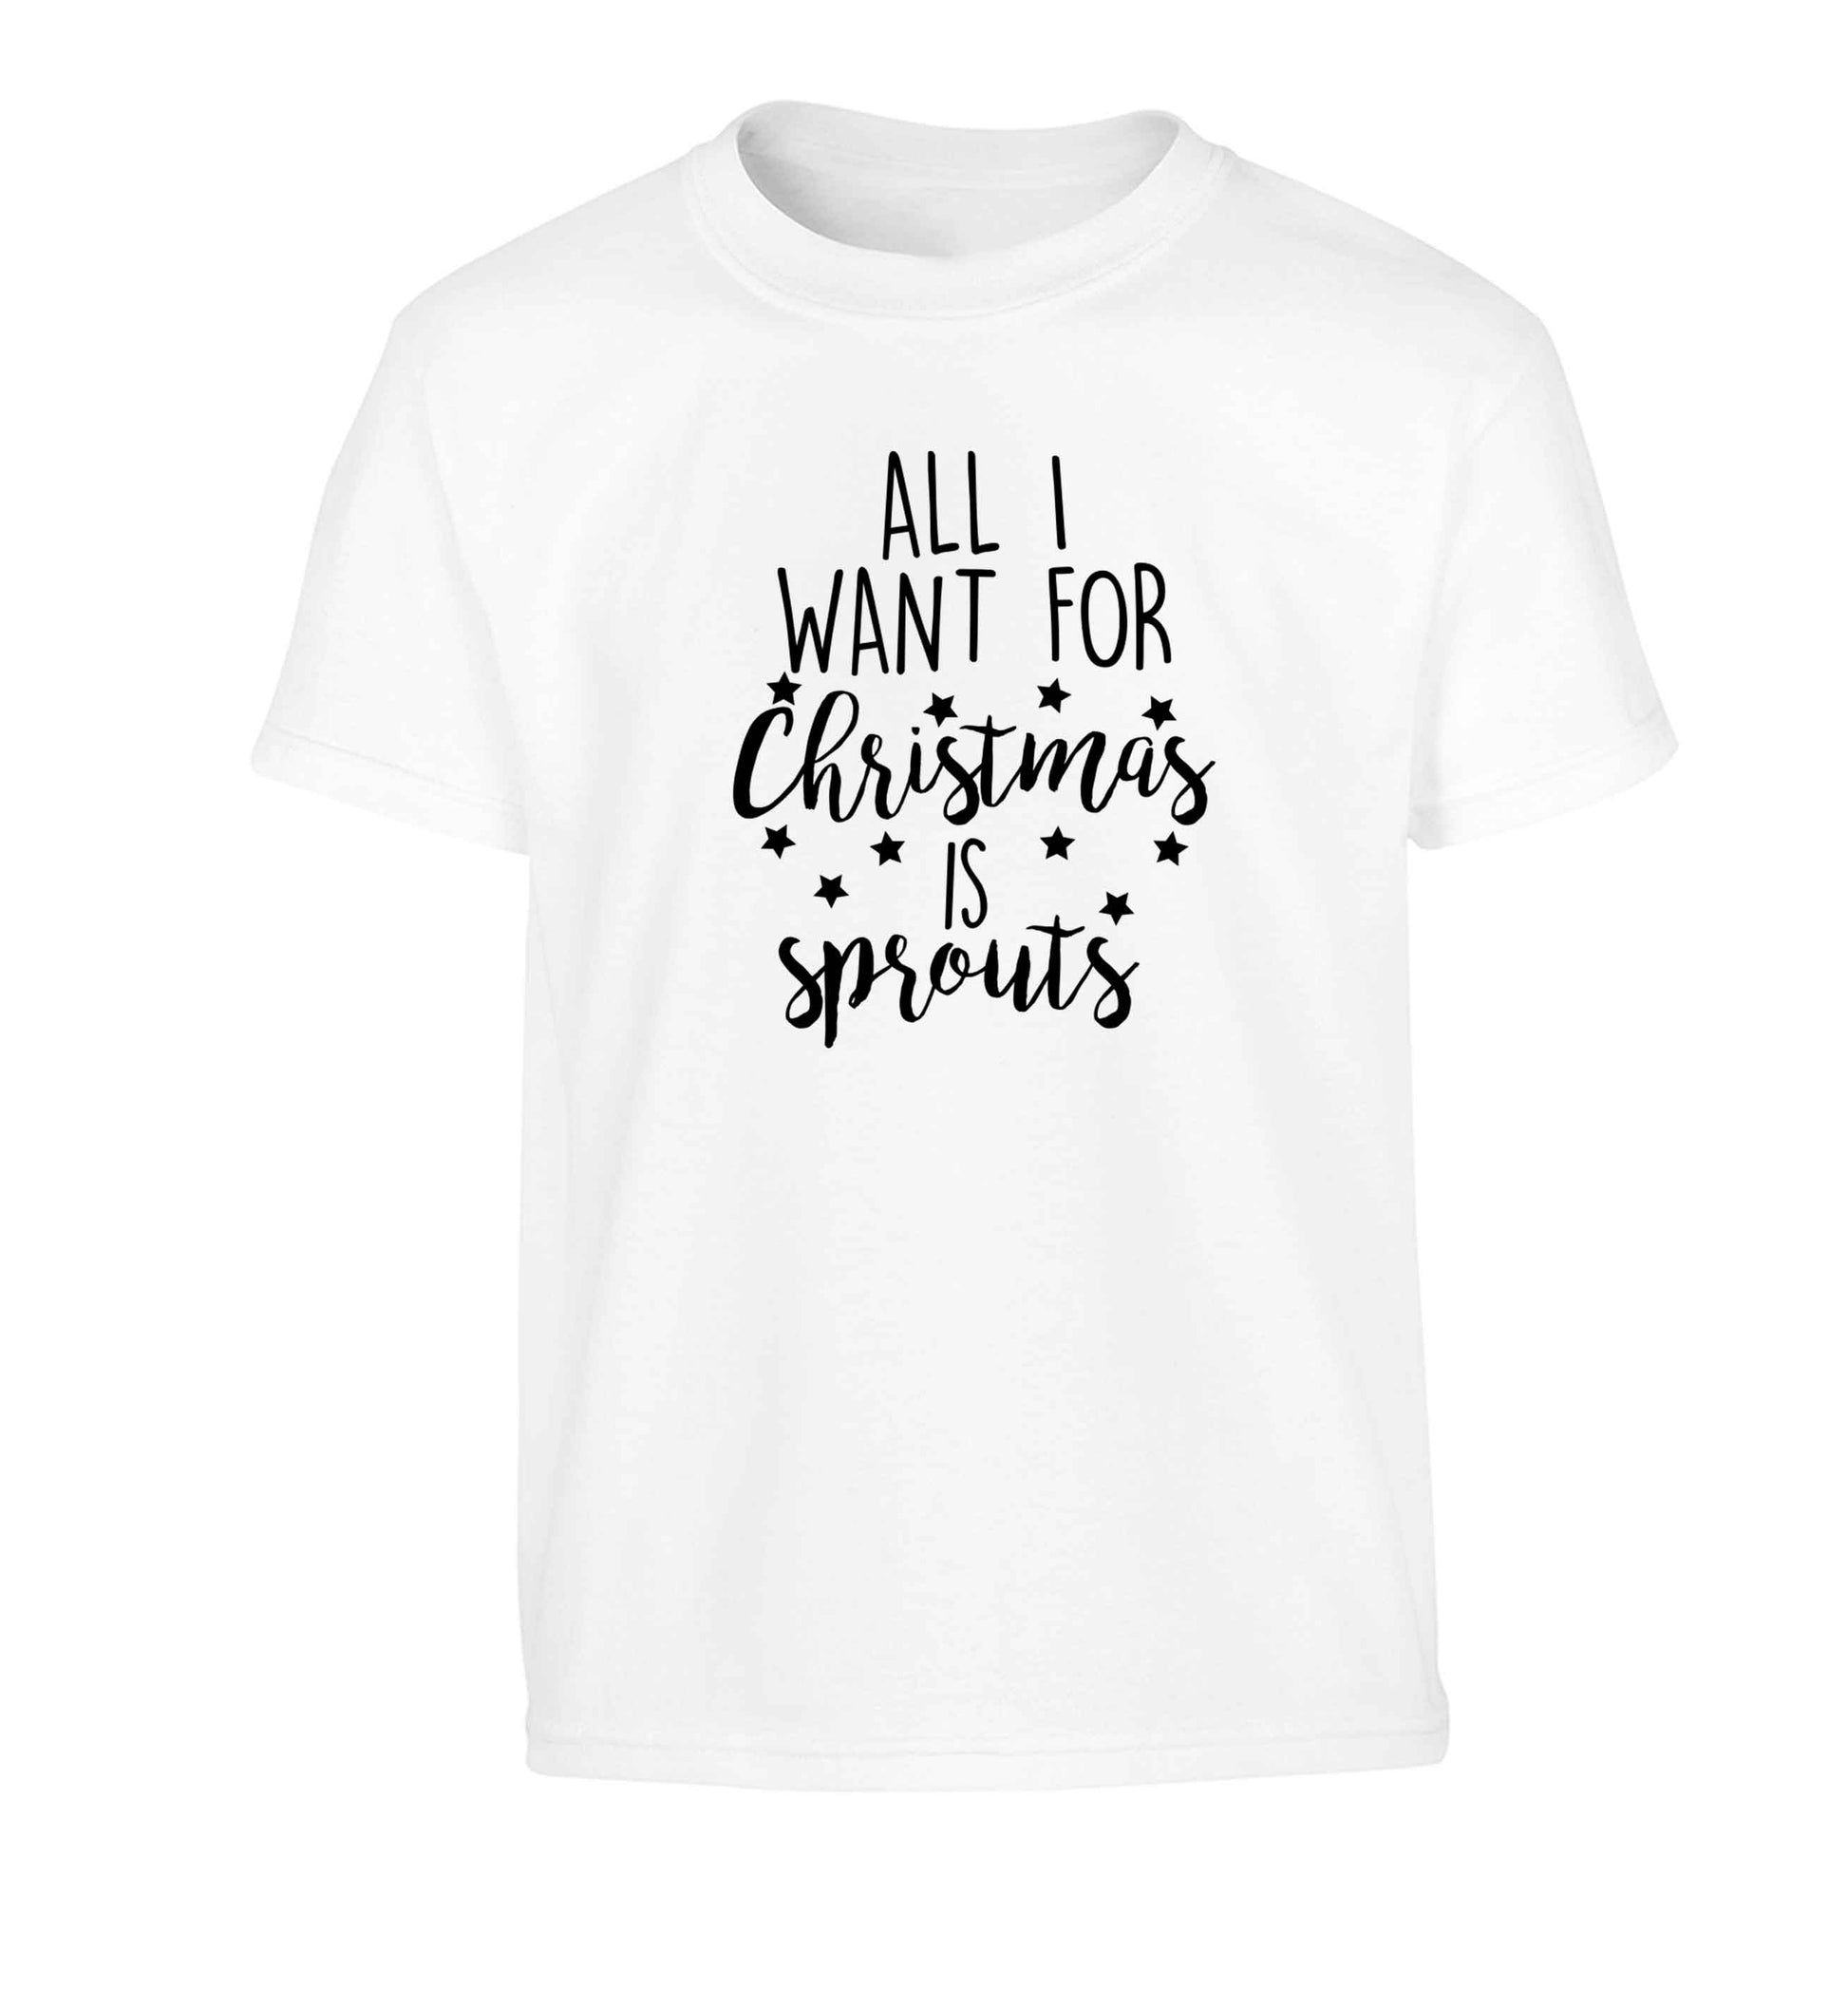 All I want for Christmas is sprouts Children's white Tshirt 12-13 Years